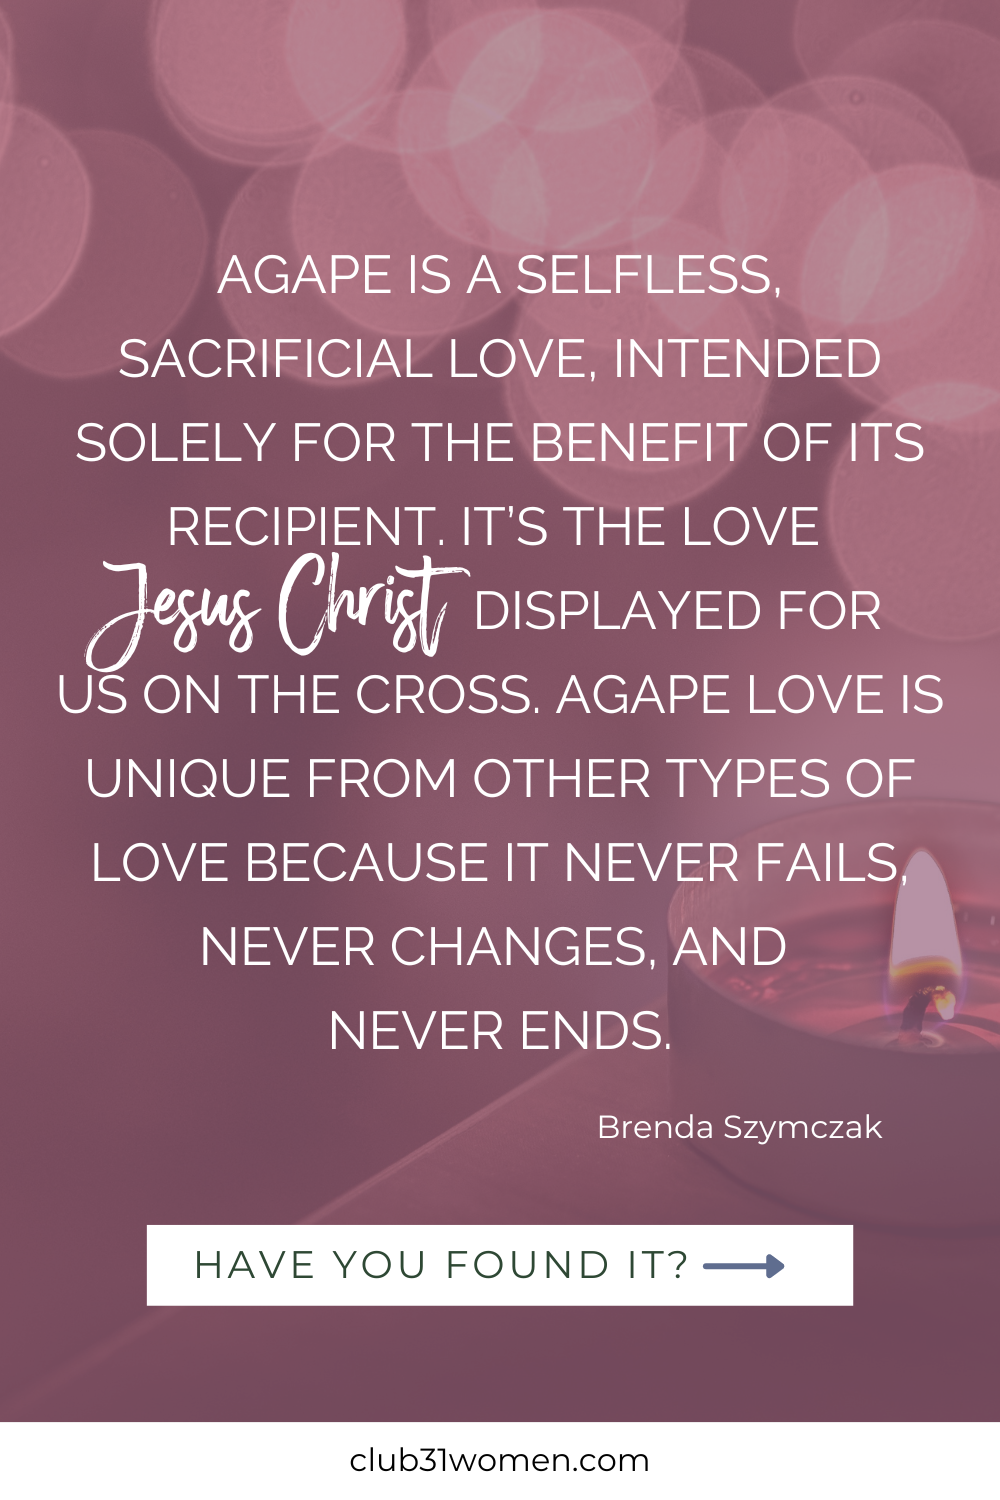 Discover God's timeless love in earthly romances like WWII and in the sacrificial devotion of Jesus Christ, where true love transcends time and finds perfection in His boundless affection. via @Club31Women